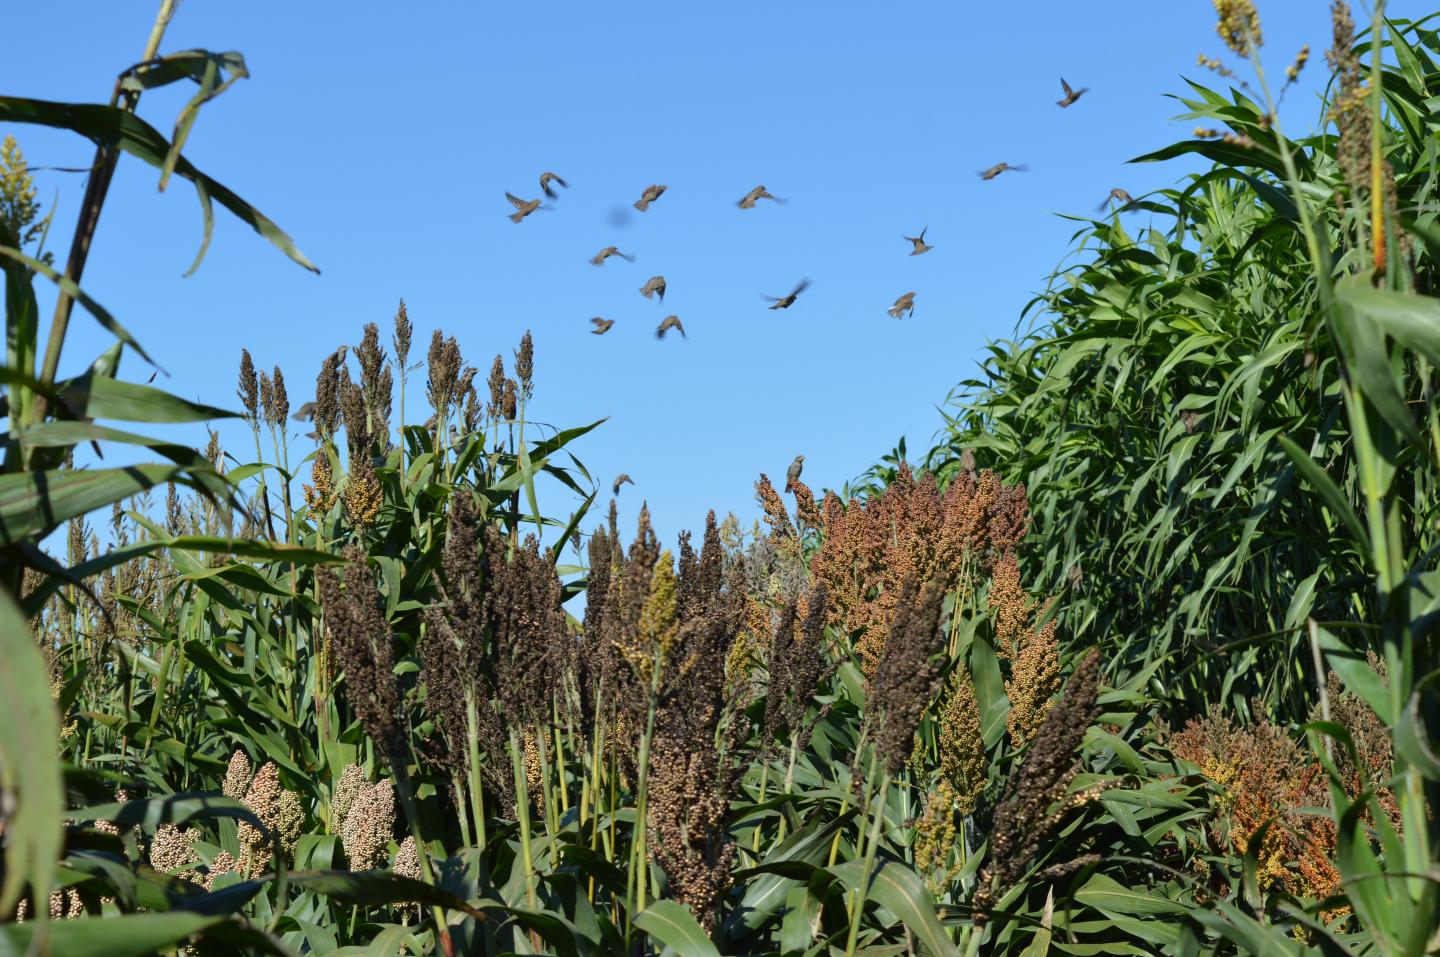 Sorghum Grows in a Field with Birds Overhead